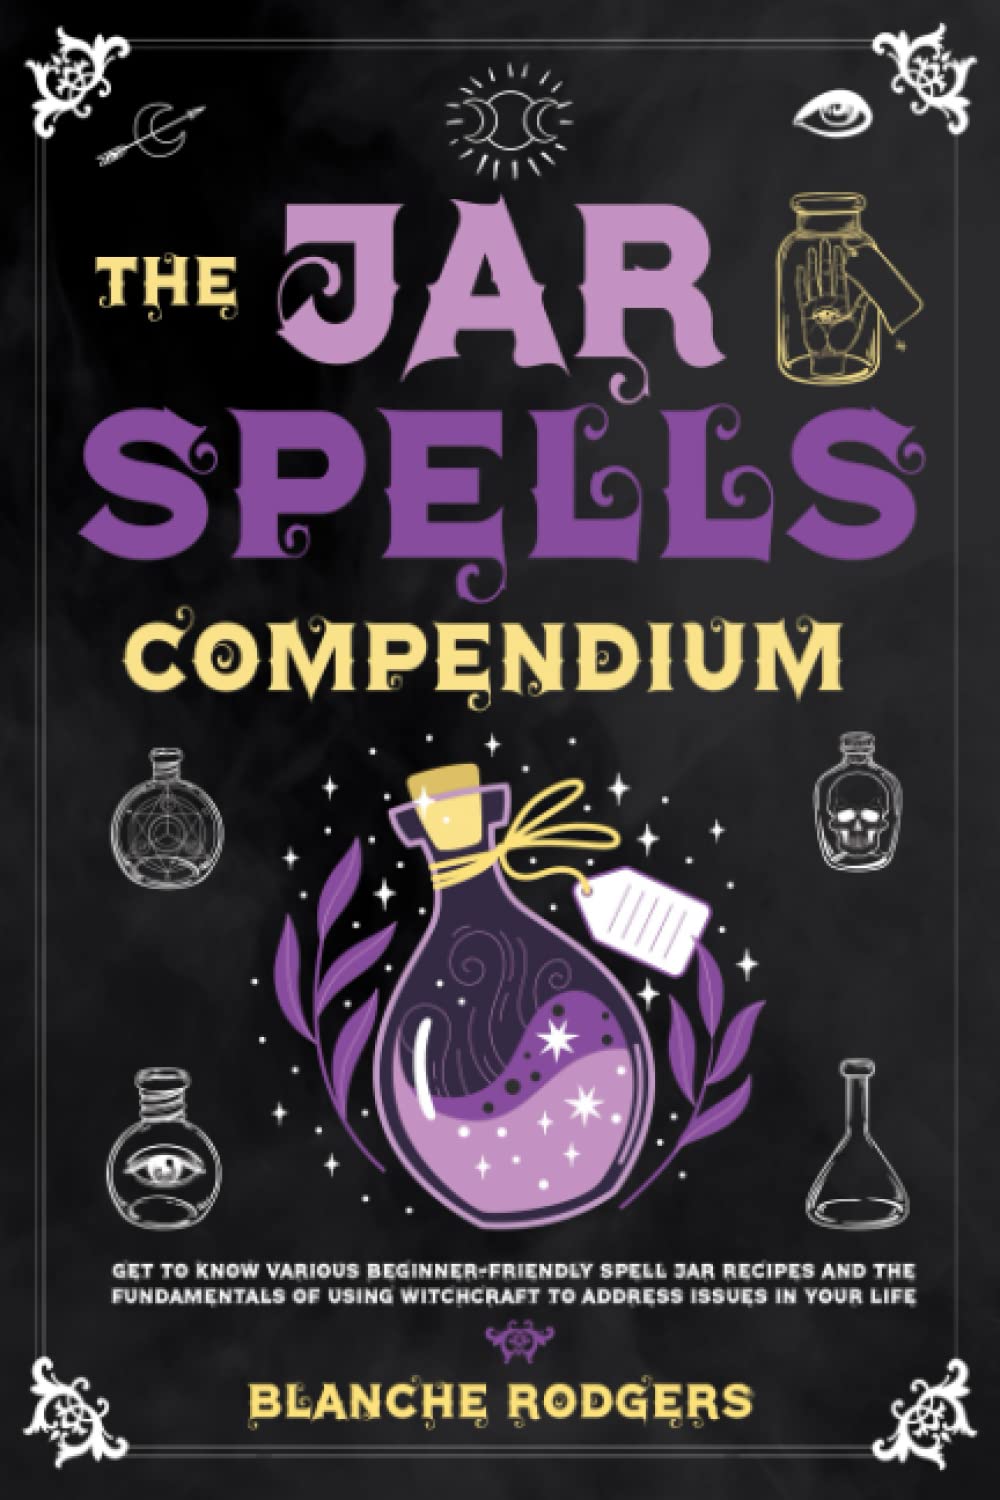 The Jar Spells Compendium: Get To Know Various Beginner-Friendly Spell Jar Recipes And The Fundamentals Of Using Witchcraft To Address Issues In Your Life